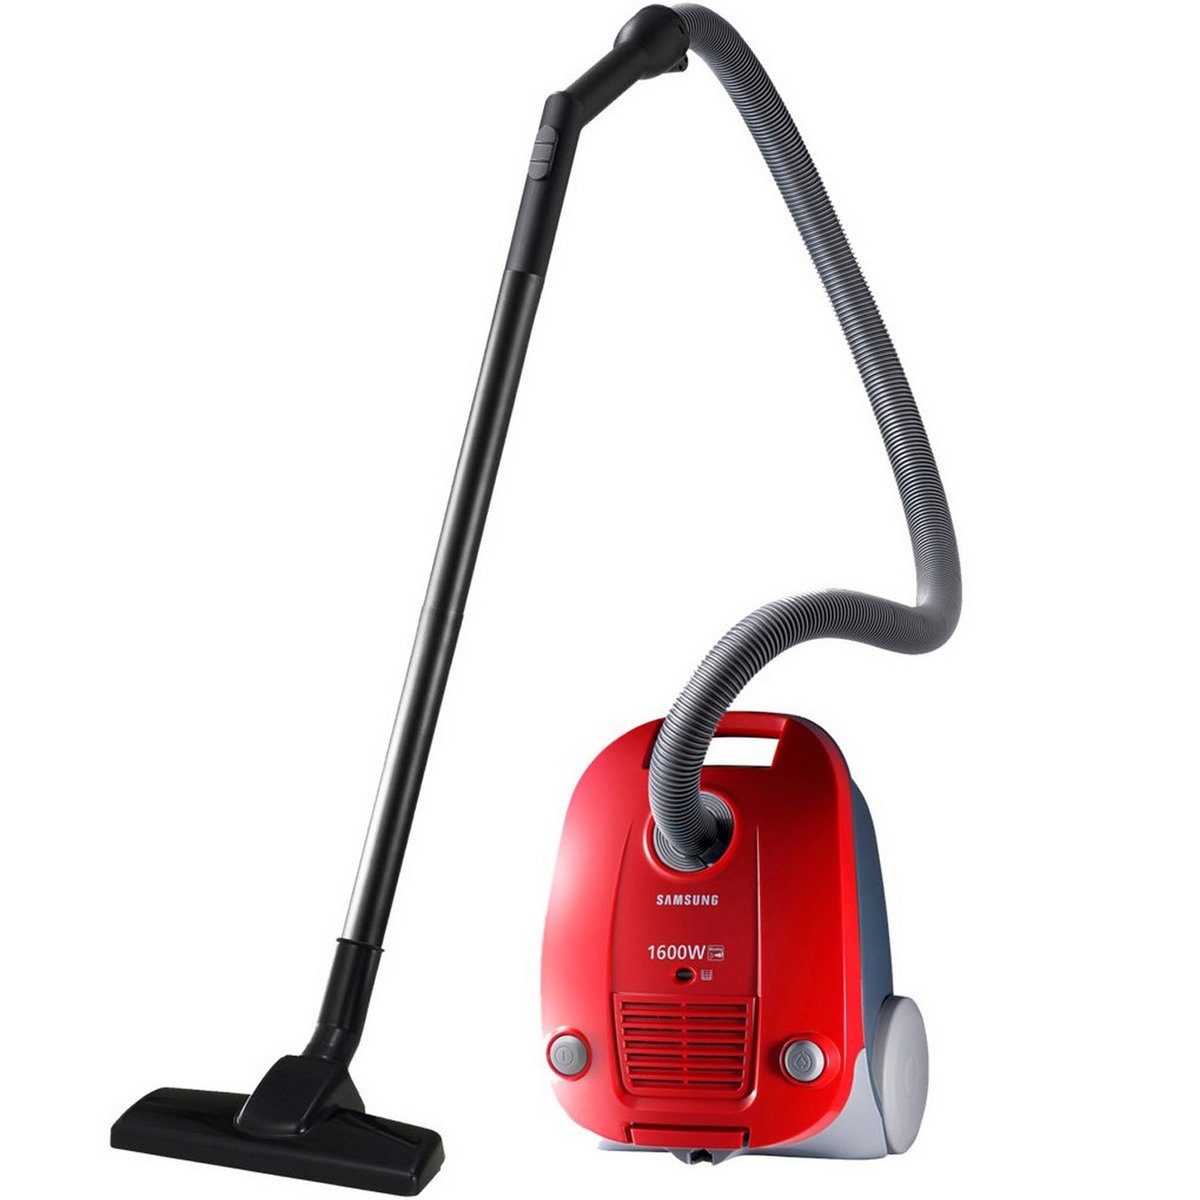 Samsung Vacuum Cleaner SC4130 Online at Best Price | Canister Vac ...